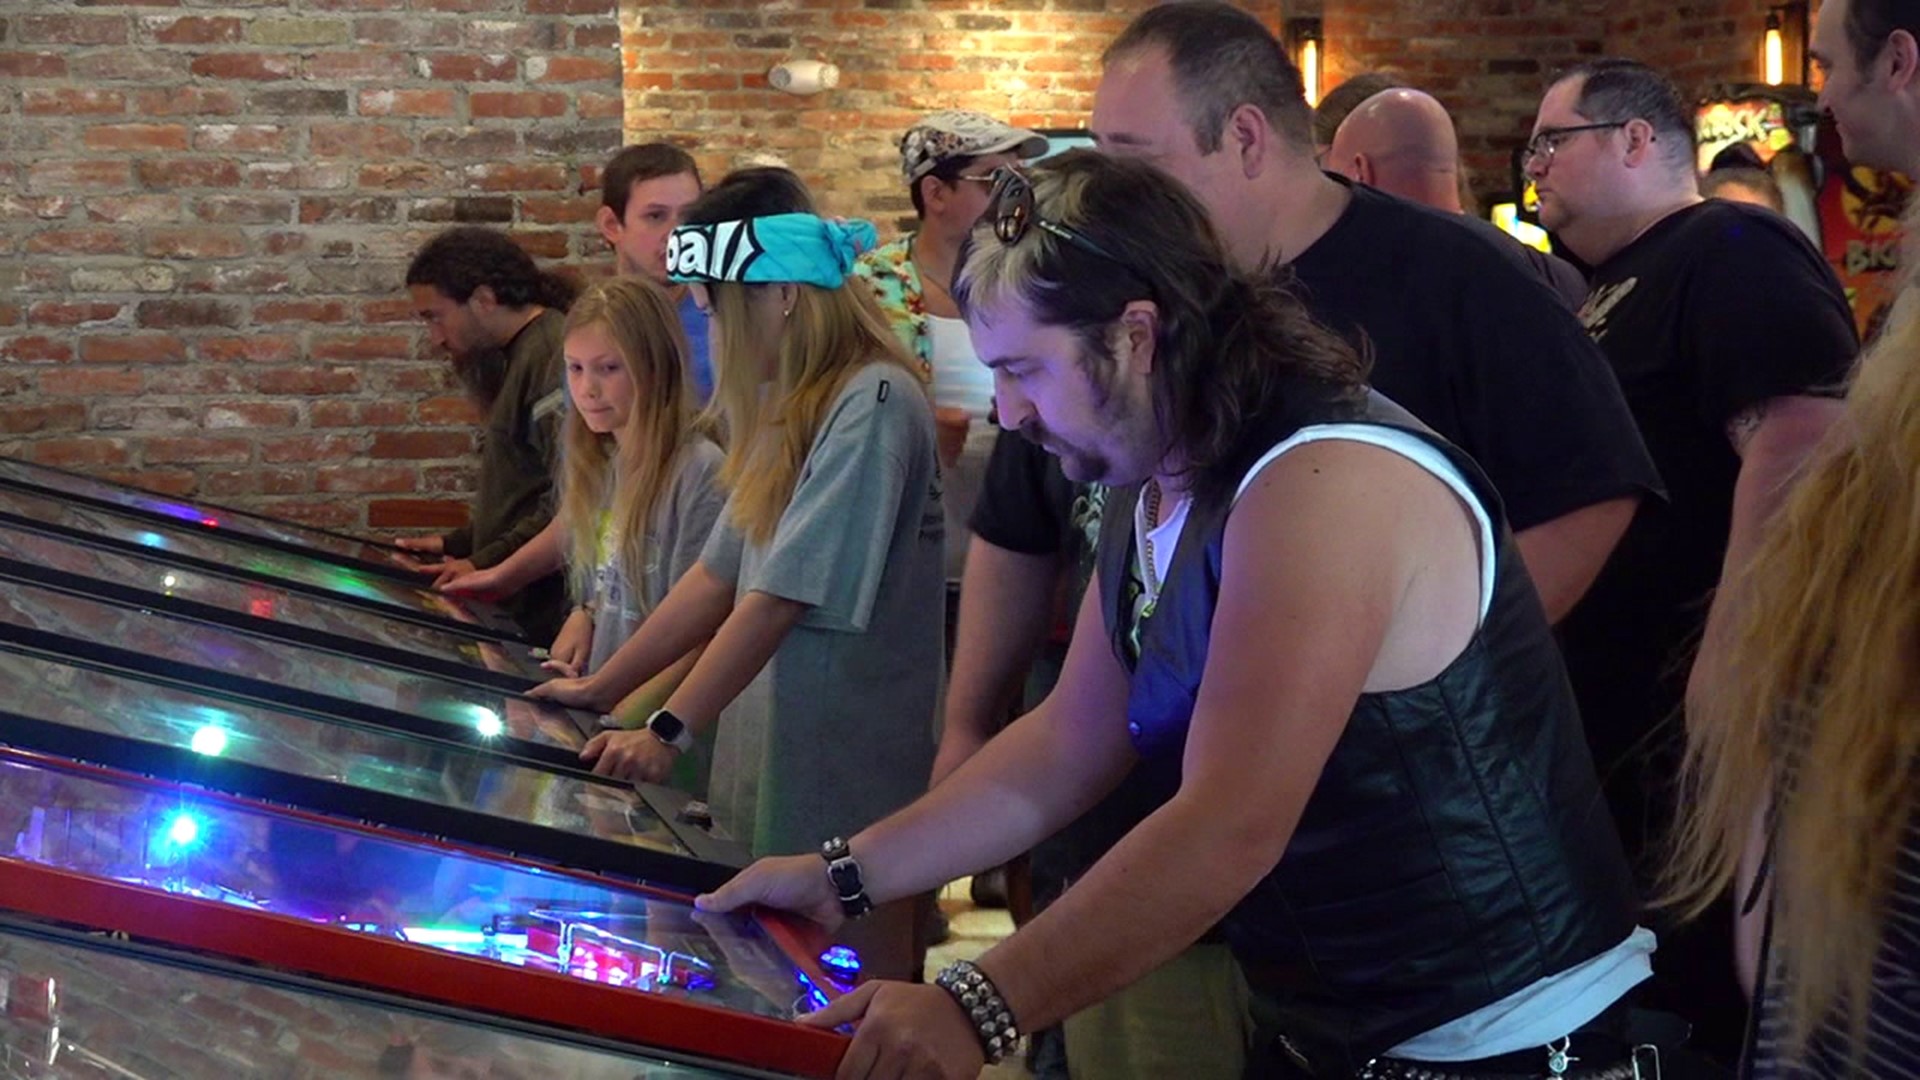 A classic arcade game is bringing players from across Pennsylvania to Lackawanna county.